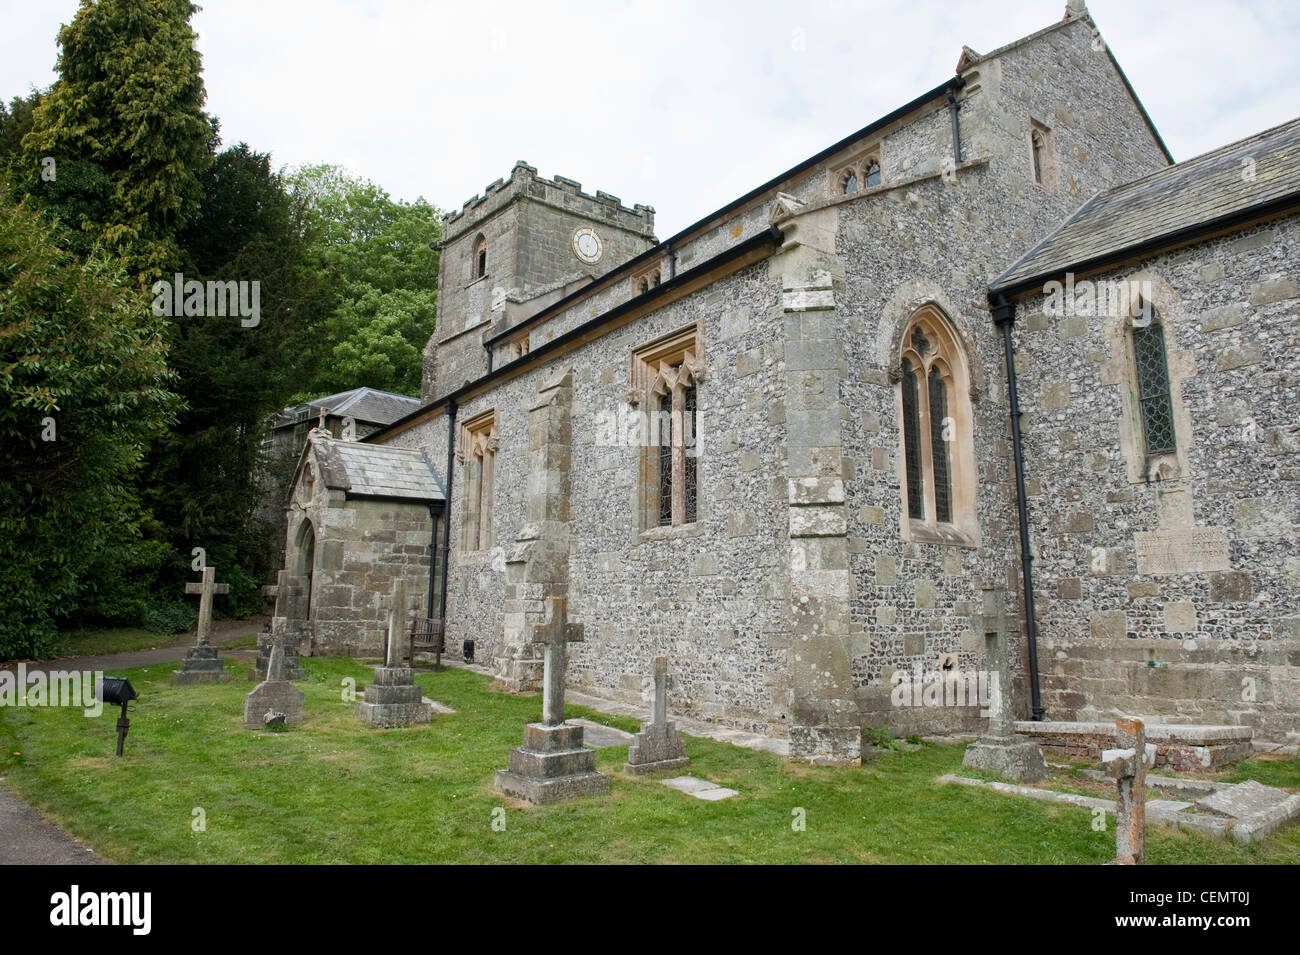 The church of St Mary, Tarrant Gunville, Dorset. Thomas Wedgwood, son of Josiah Wedgwood, was buried in the church in 1805. Stock Photo